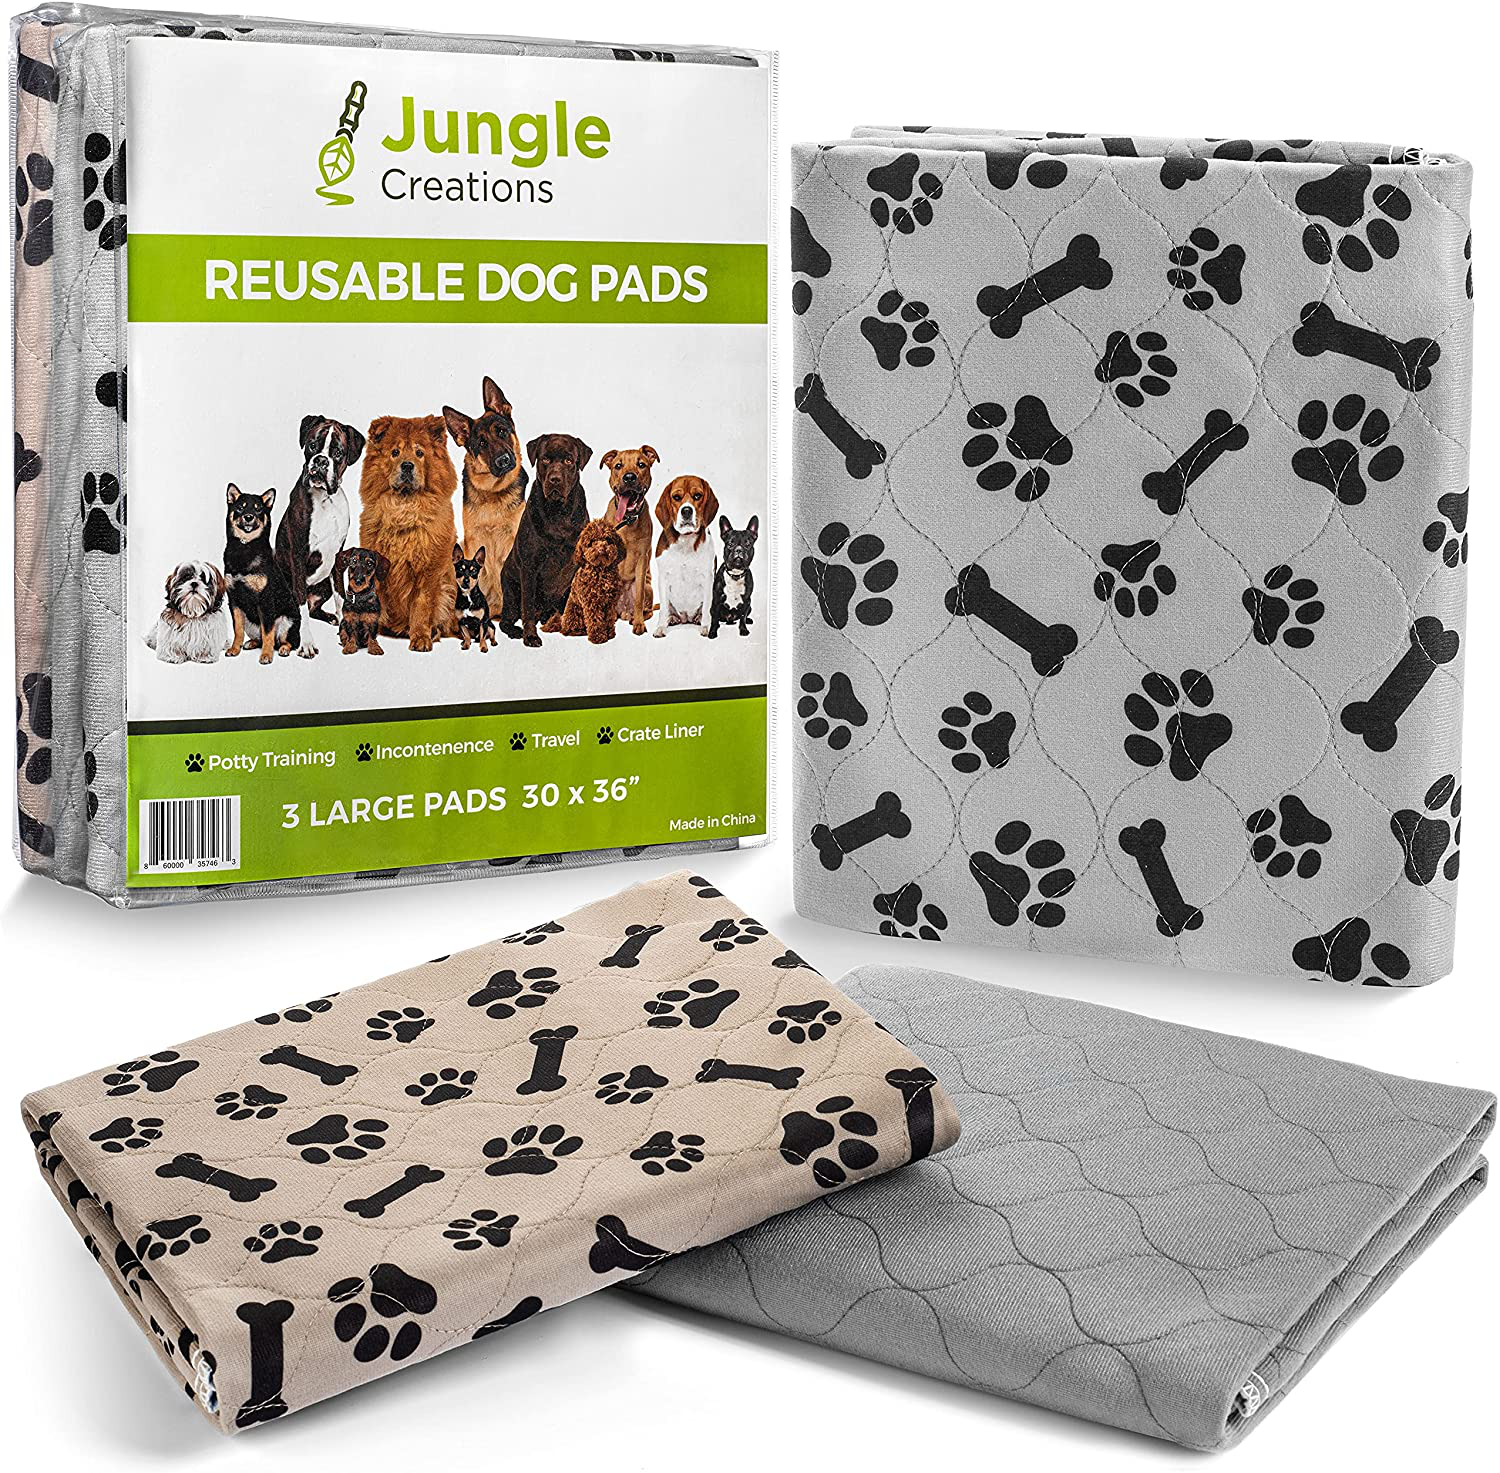 Paw Inspired Washable Pee Pads for Dogs | Reusable Puppy Pads | Waterproof  Whelping Pads | Washable Training Pet Pads, Washable Potty Pads Extra Large